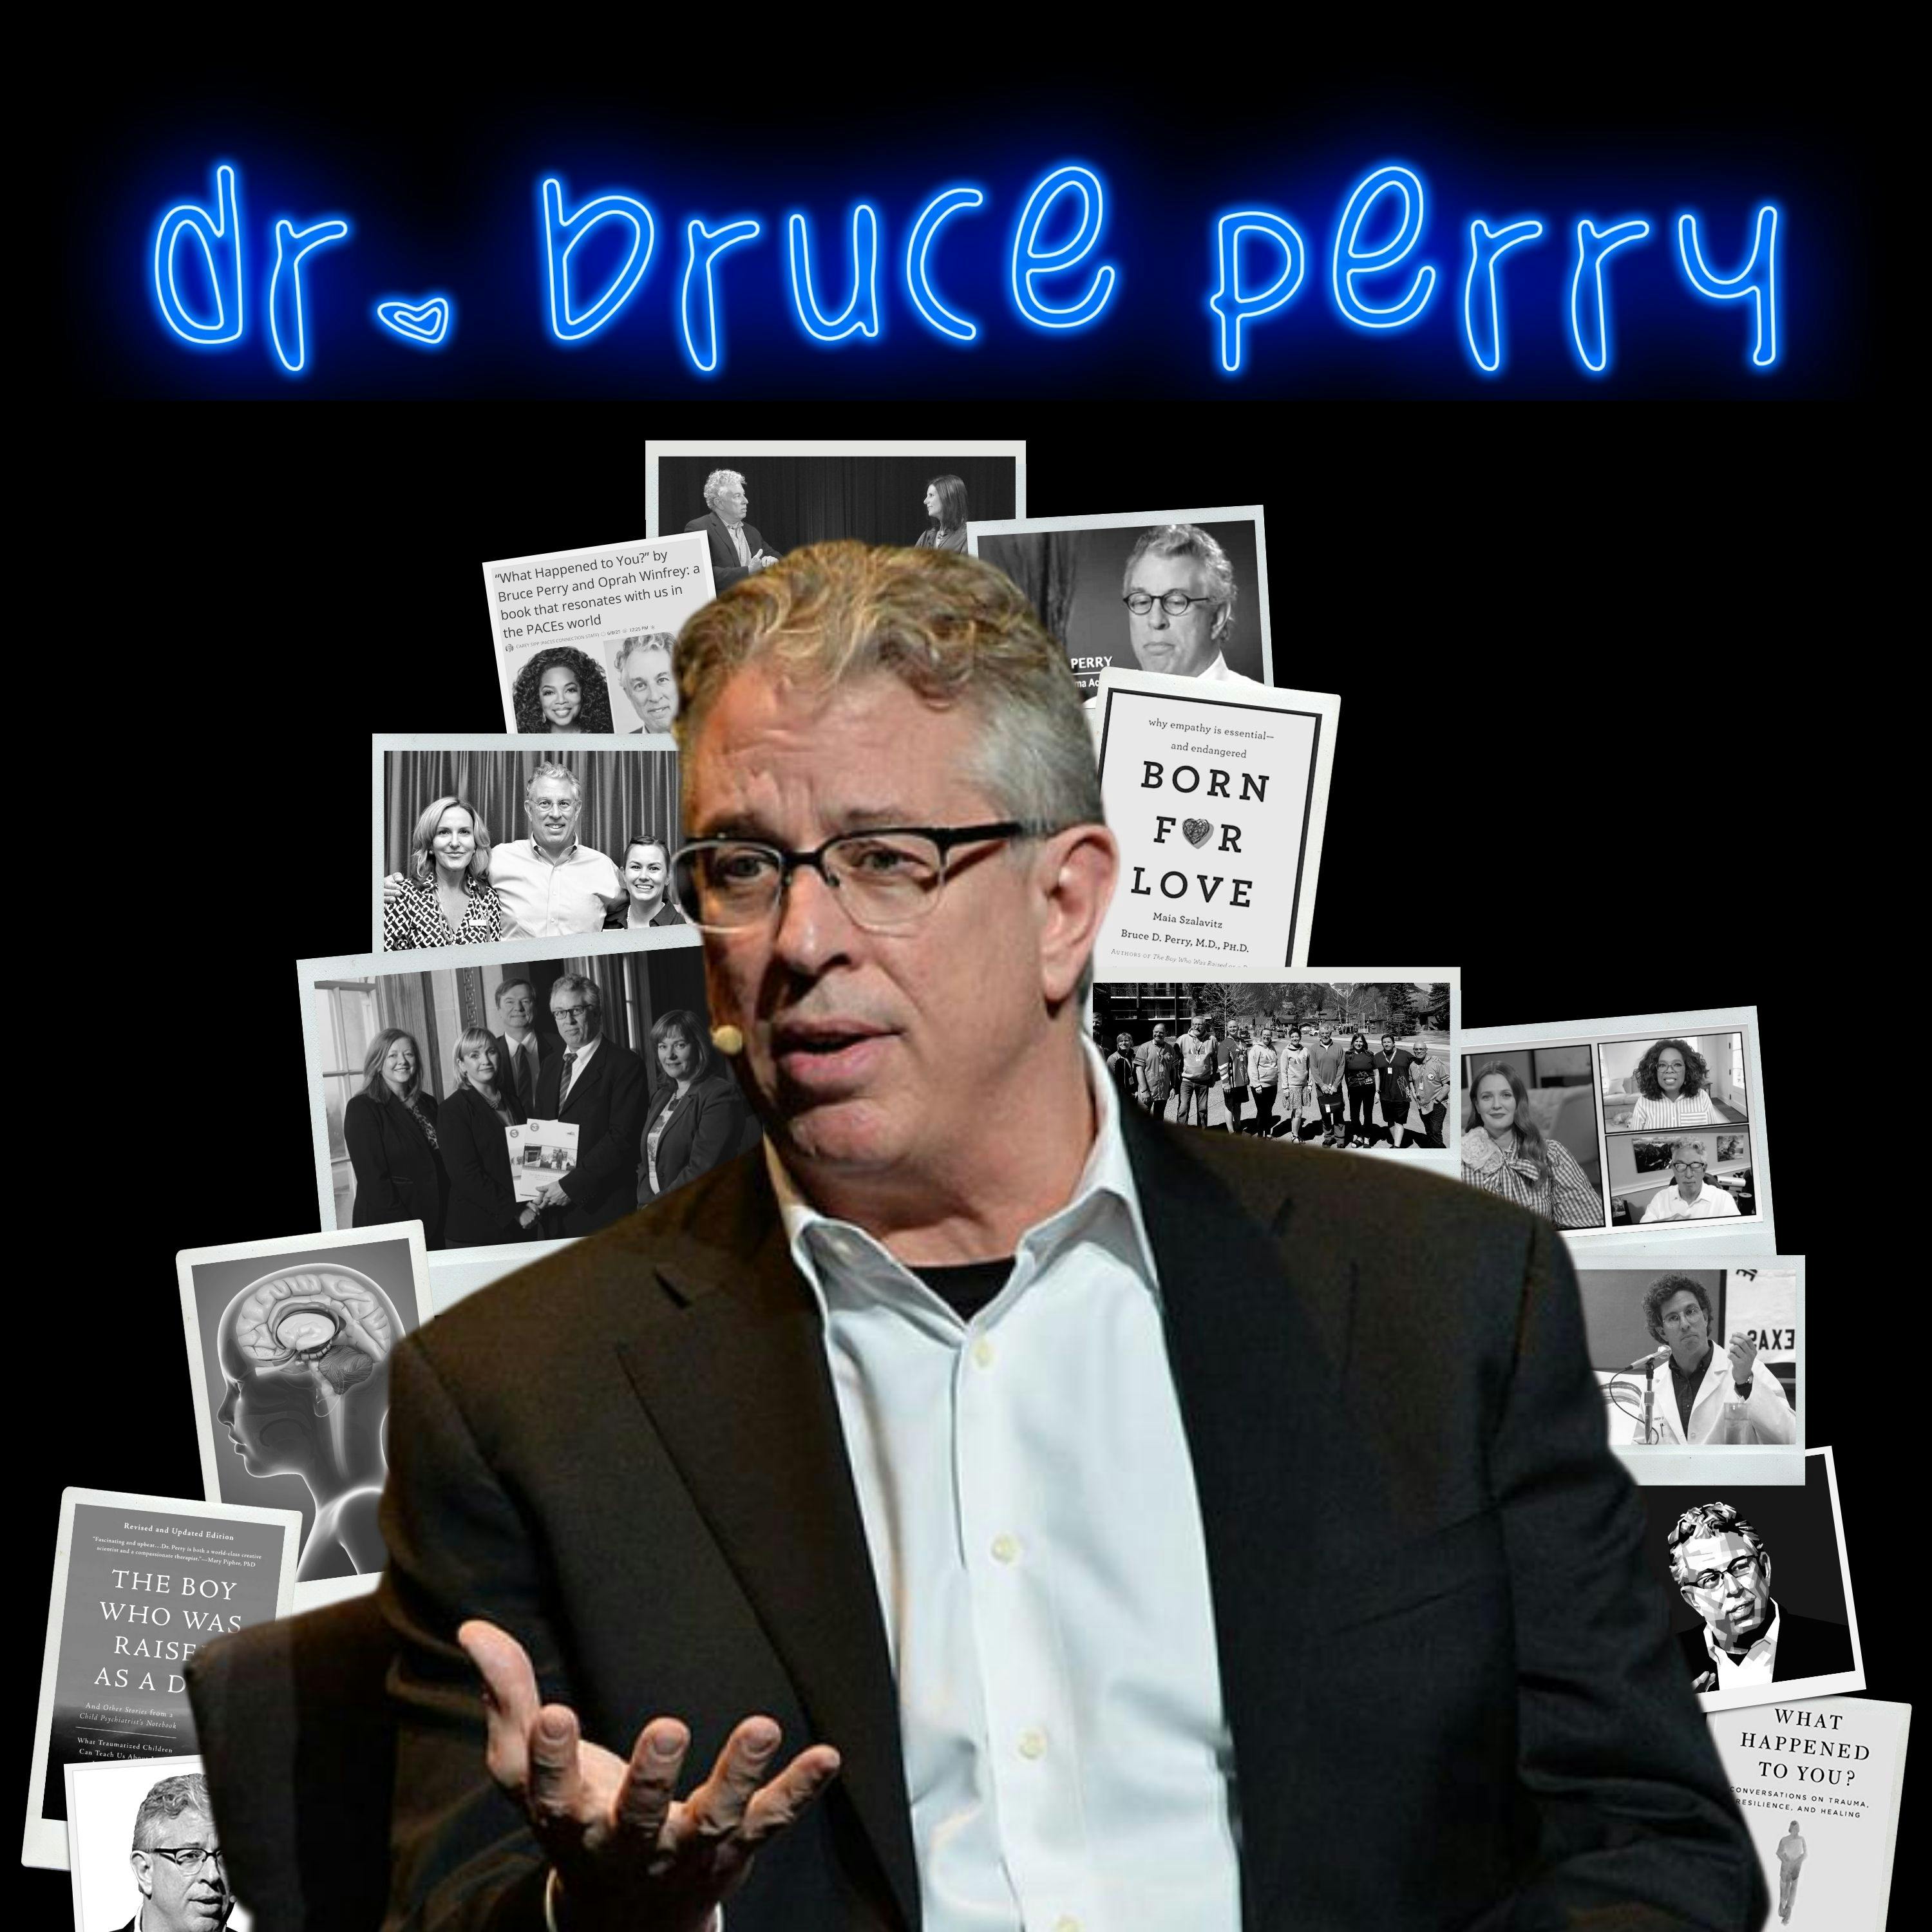 The Child Actor Crisis with Dr. Bruce Perry Vulnerable with Christy